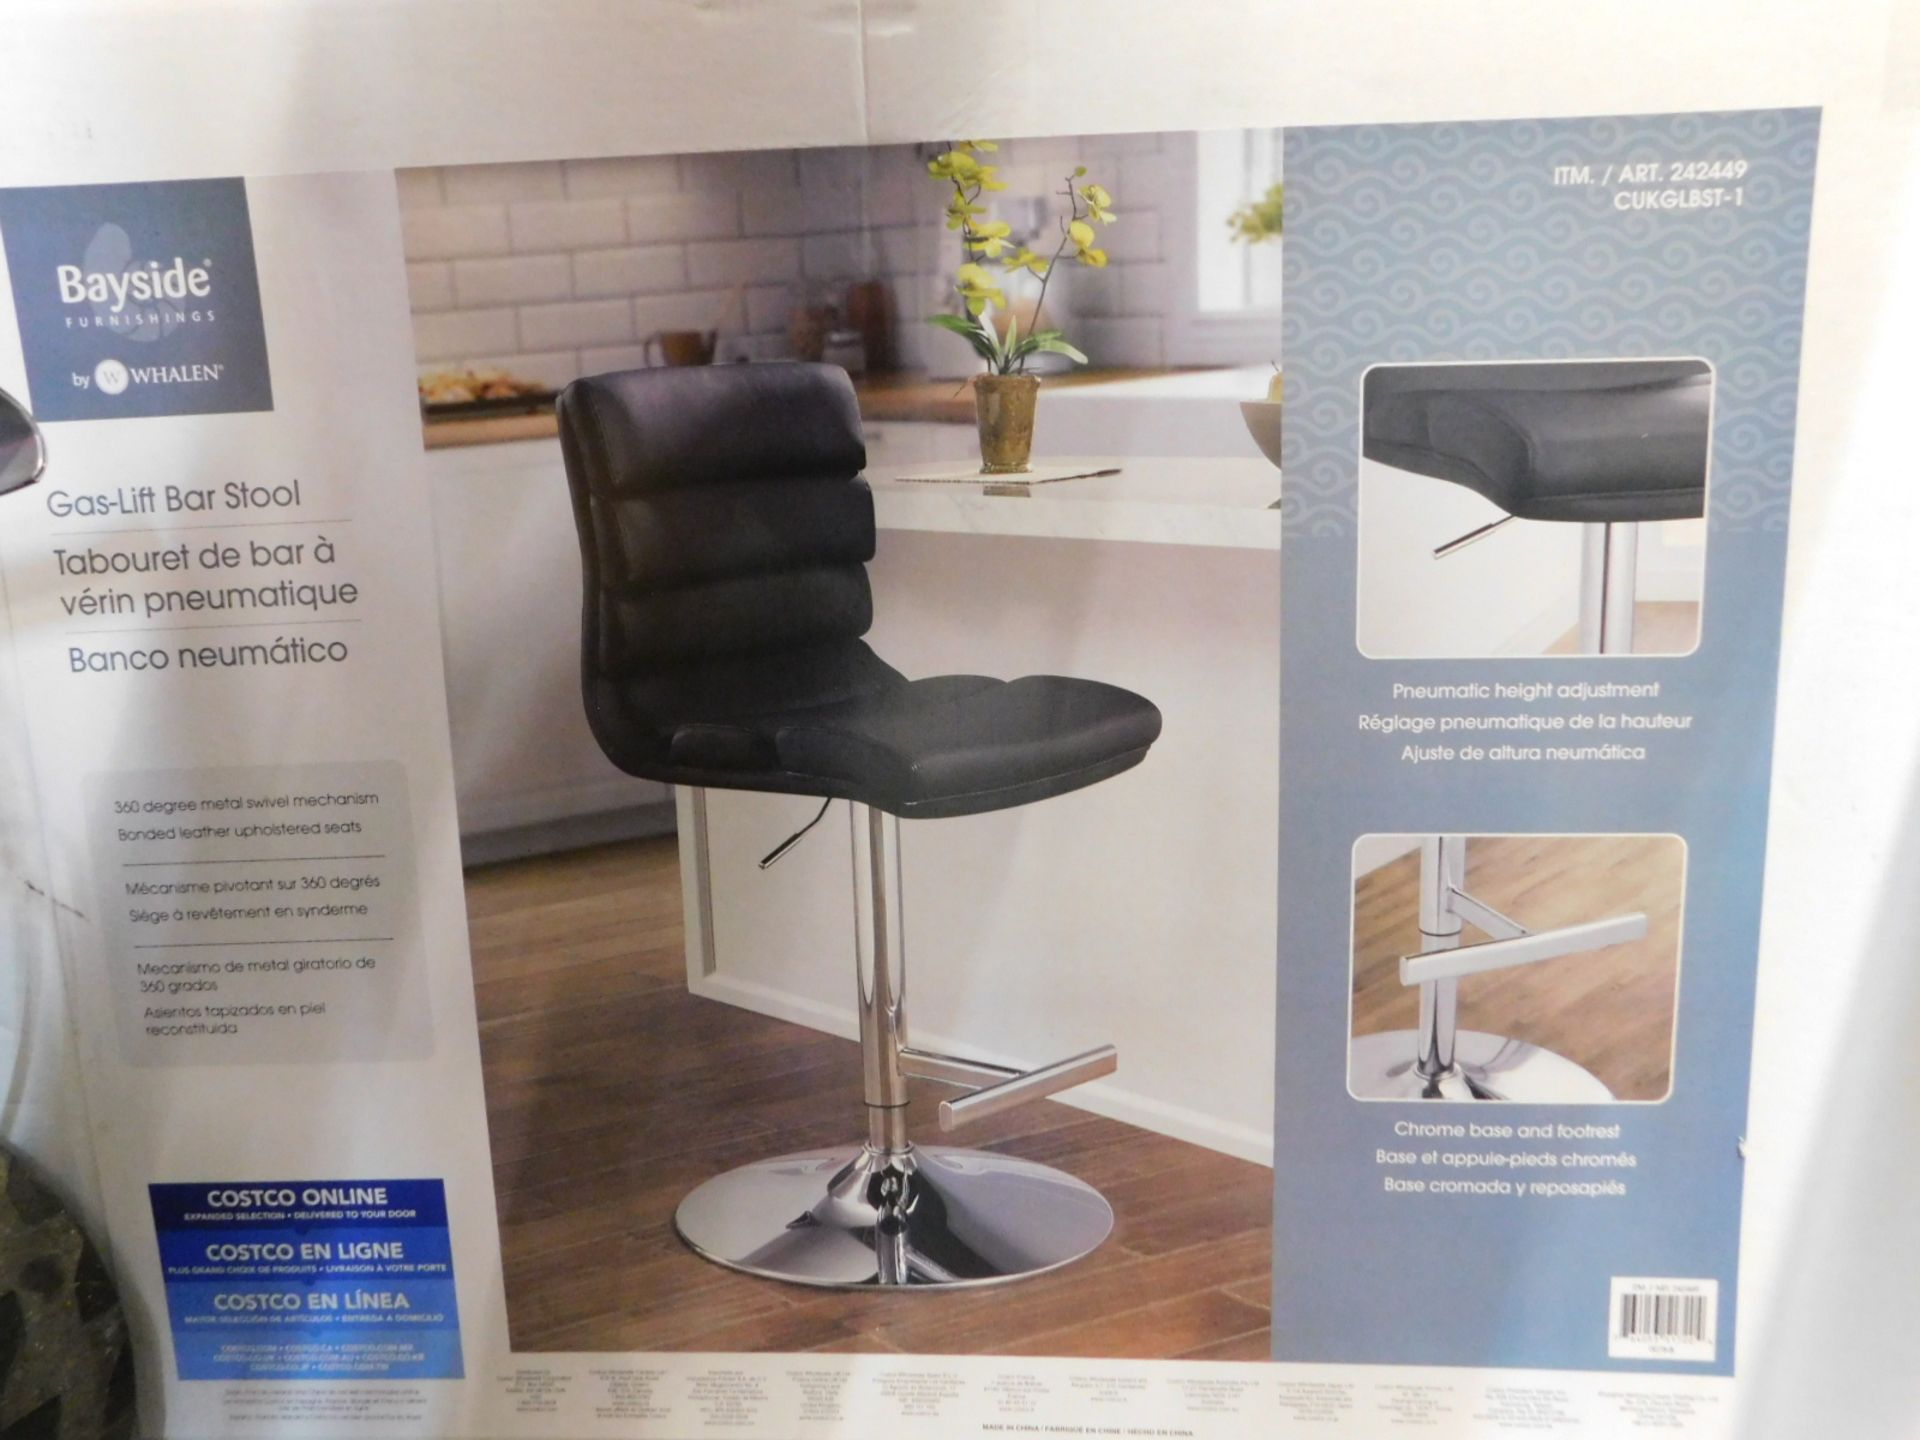 1 BOXED BAYSIDE FURNISHINGS FAUX LEATHER GAS LIFT BAR STOOL RRP Â£119.99